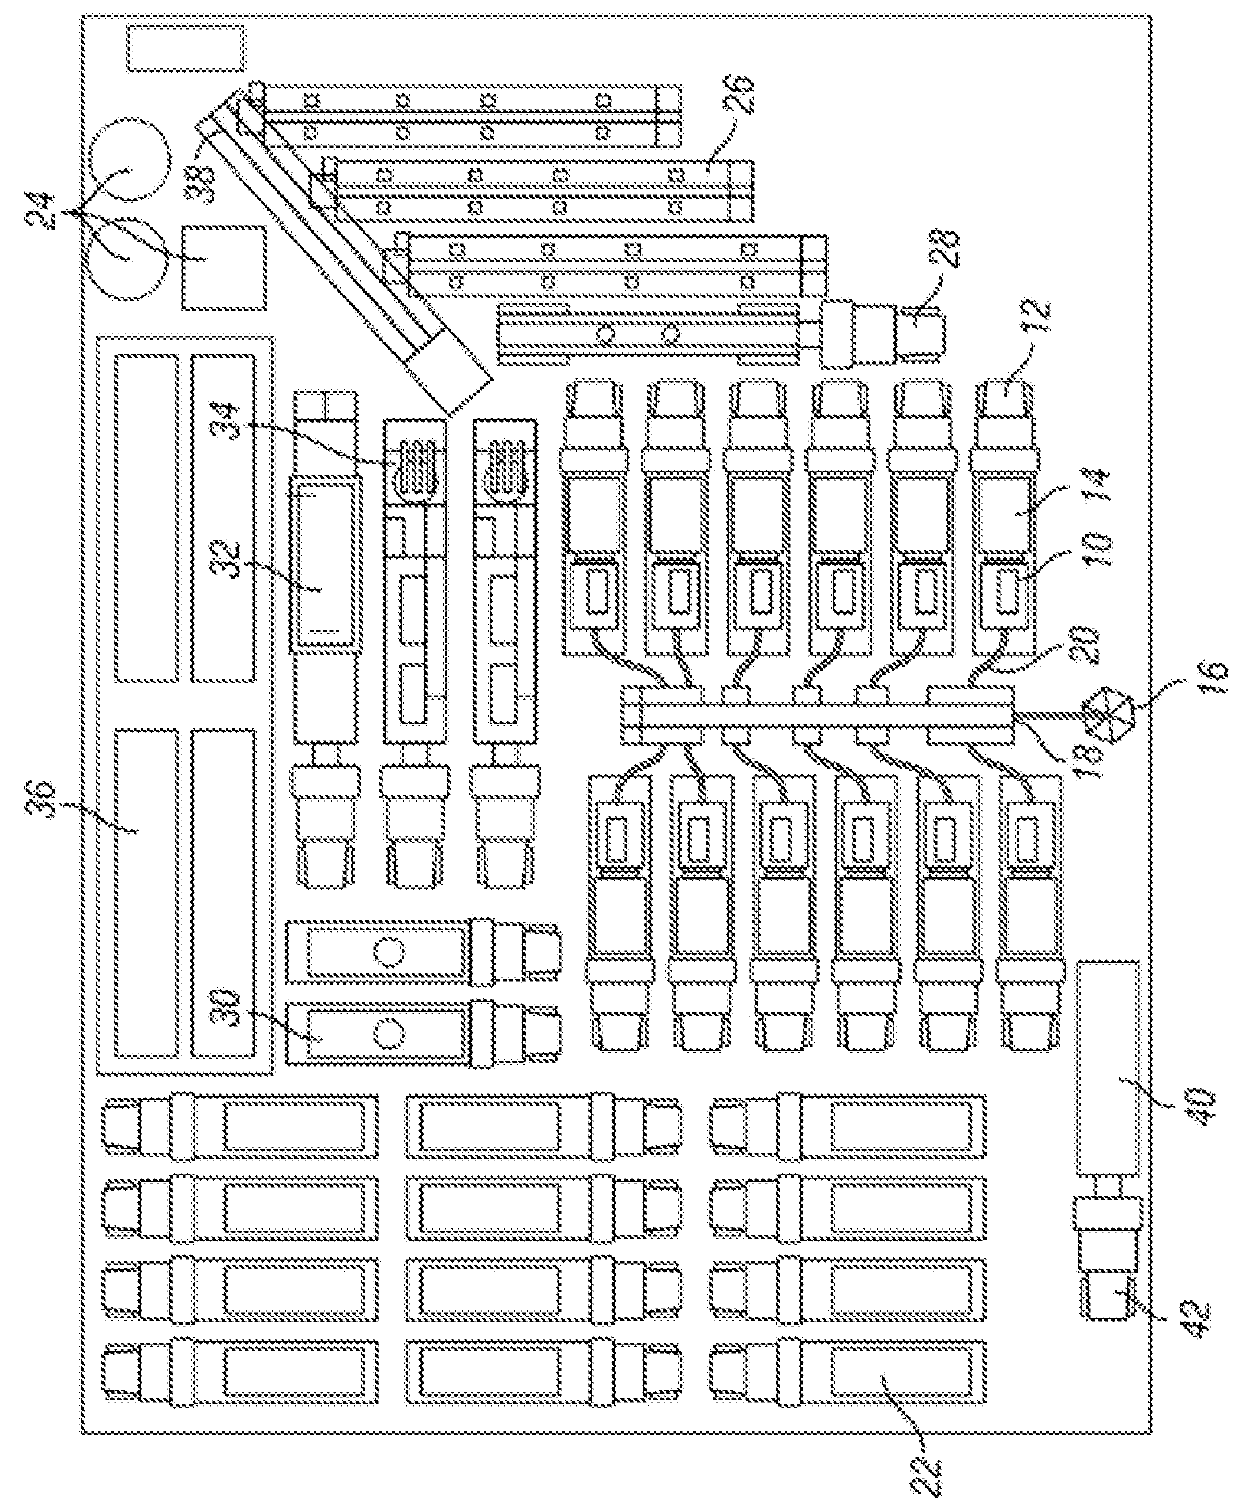 System for centralized monitoring and control of electric powered hydraulic fracturing fleet